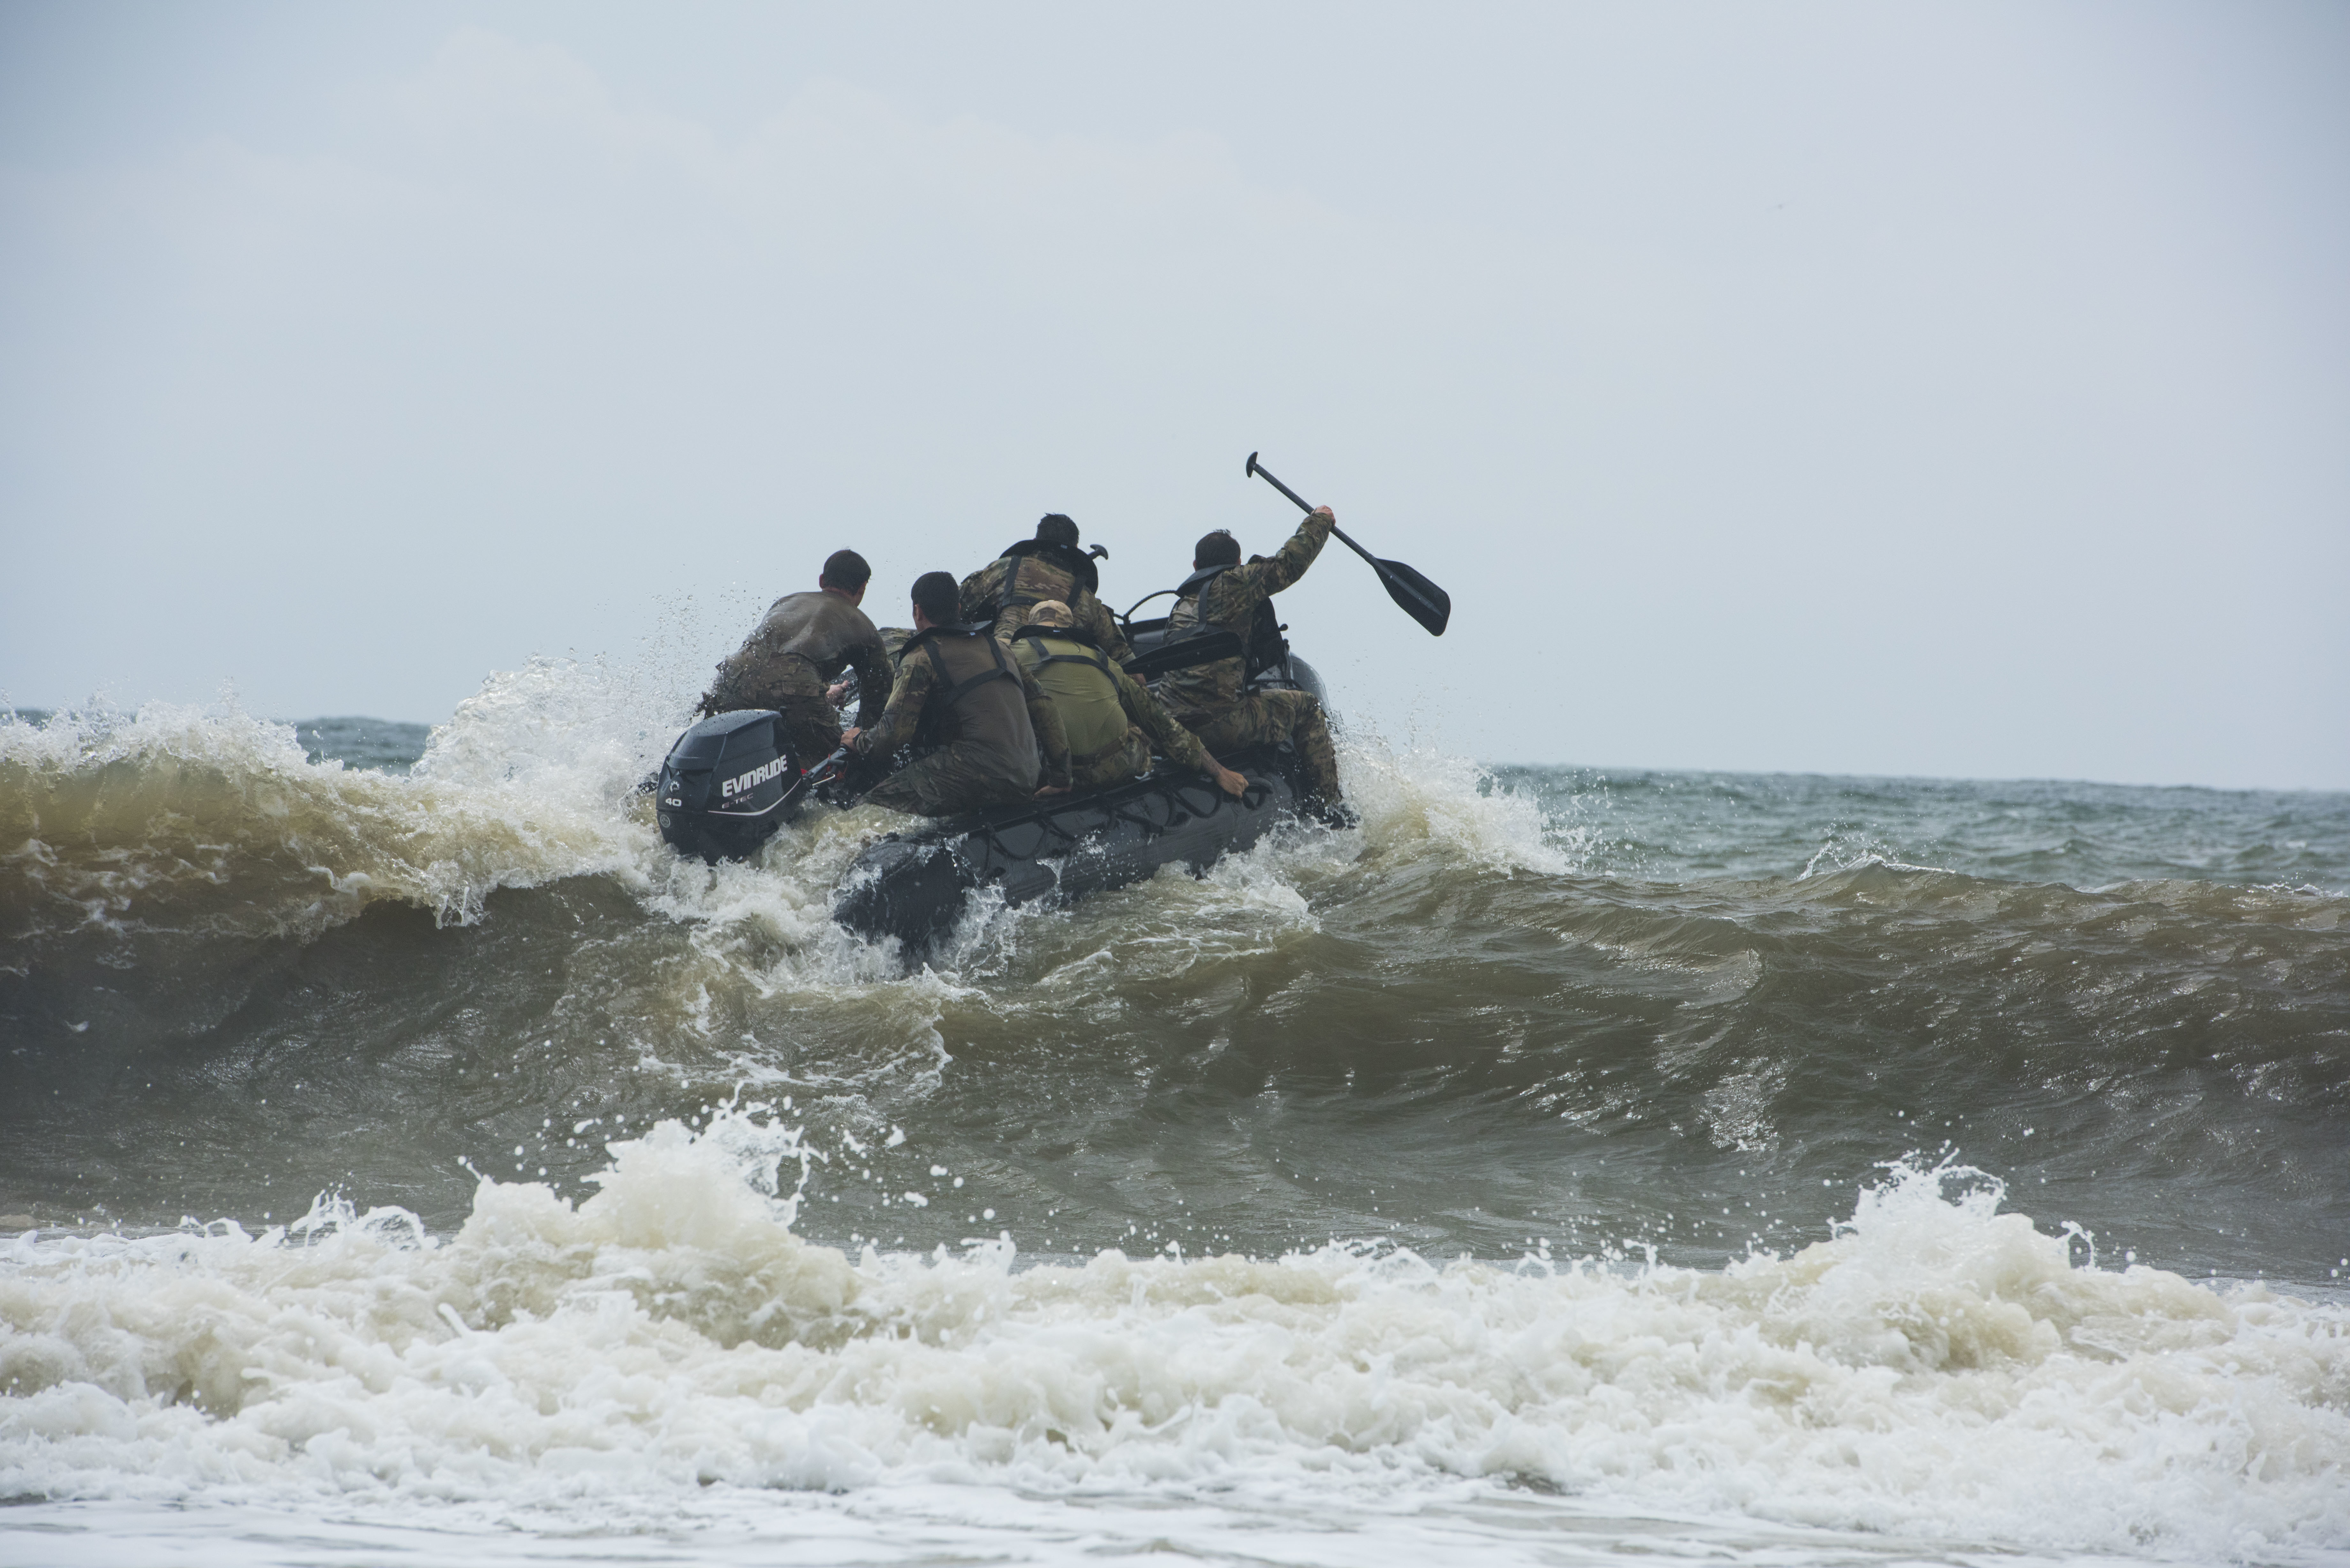 Heavy seas don't stop National Guard SF combat divers